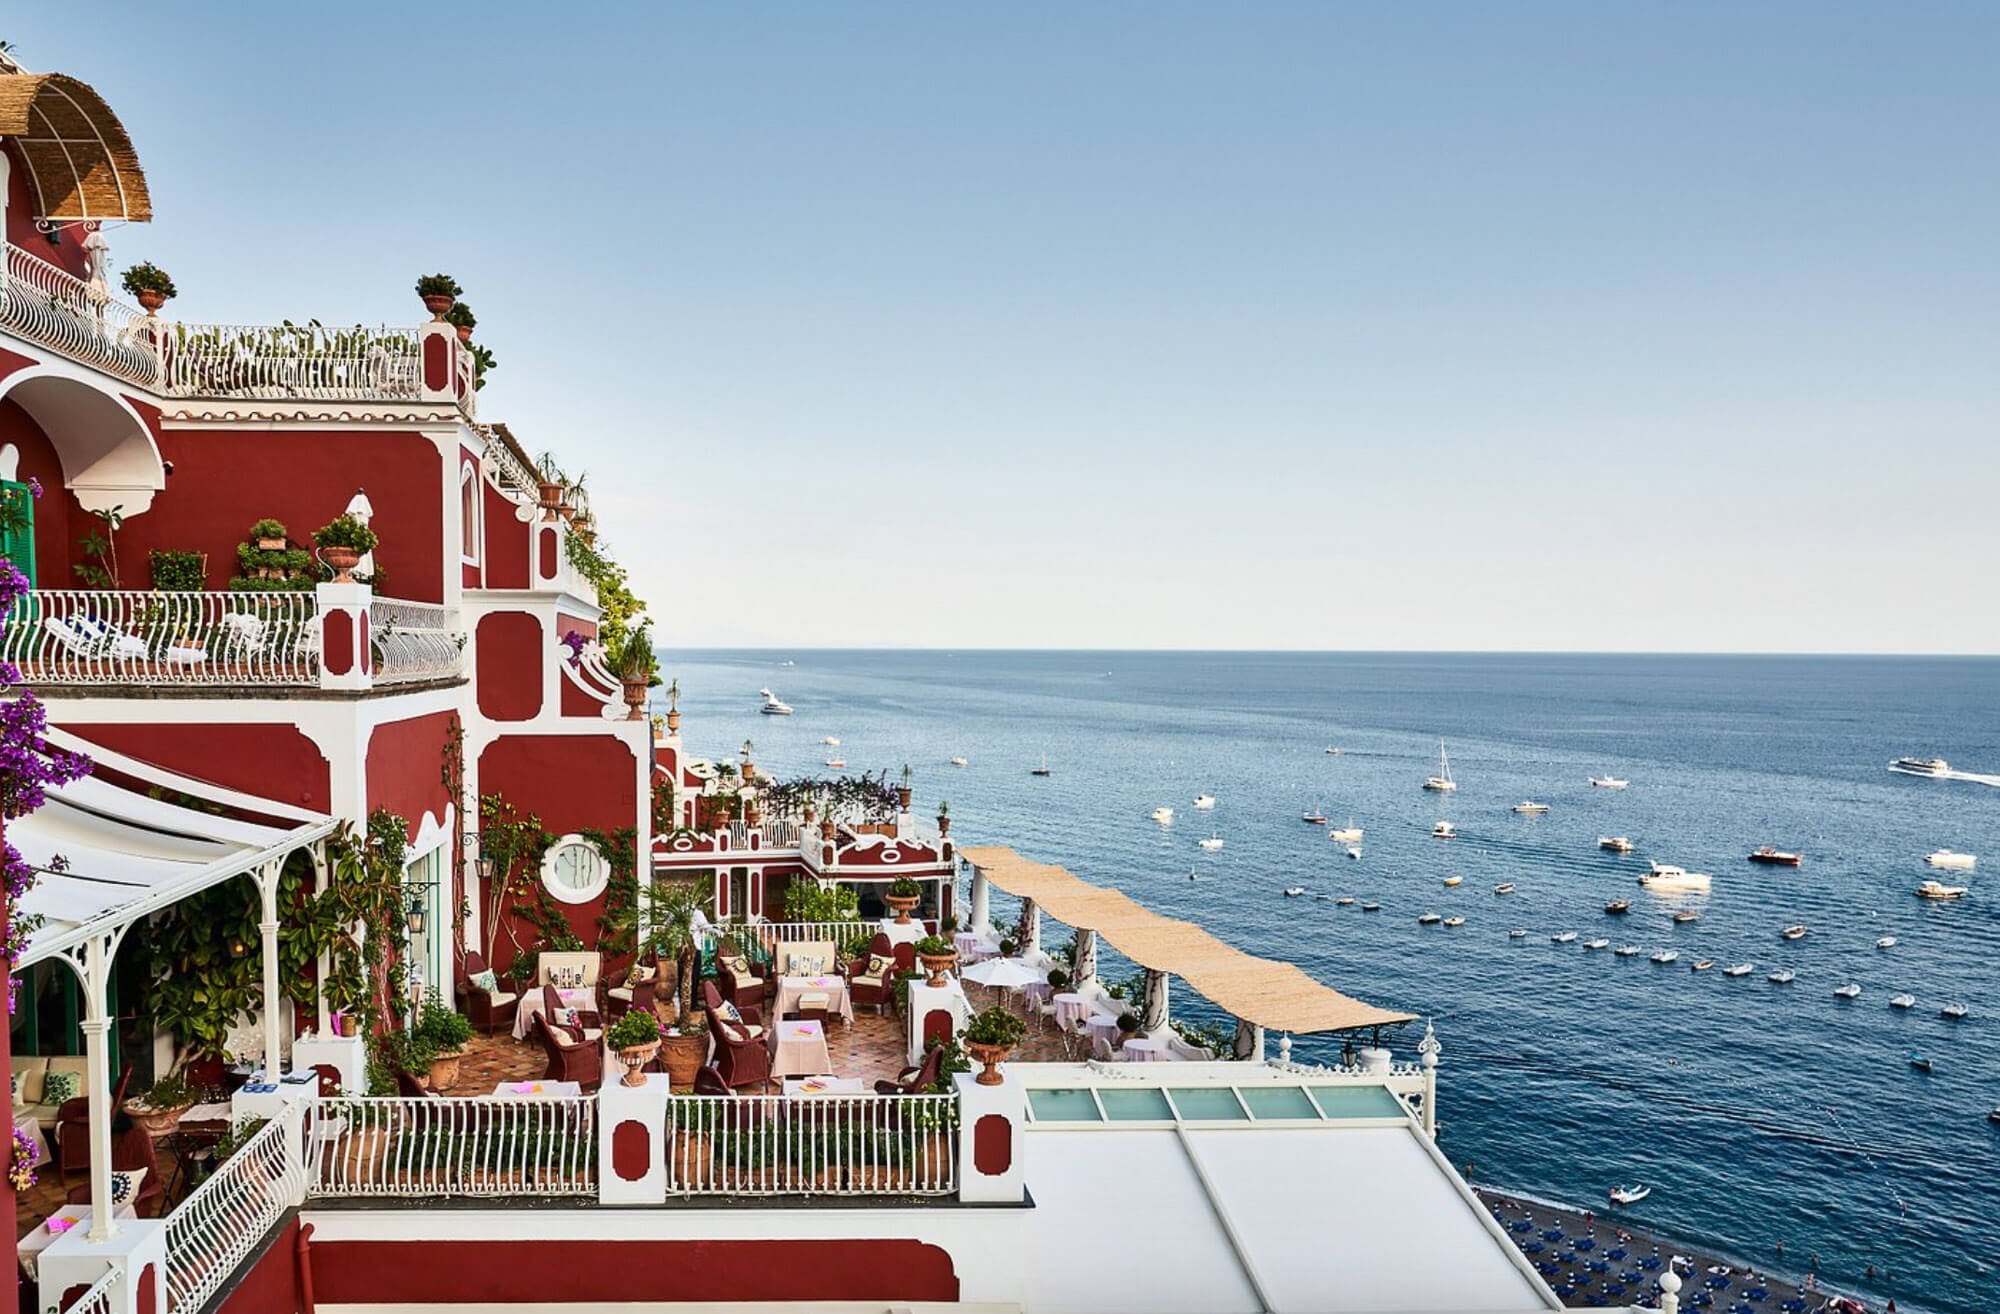 Views of Aldo’s Cocktail Bar and Seafood Grill at Le Sirenuse in Positano and the sea